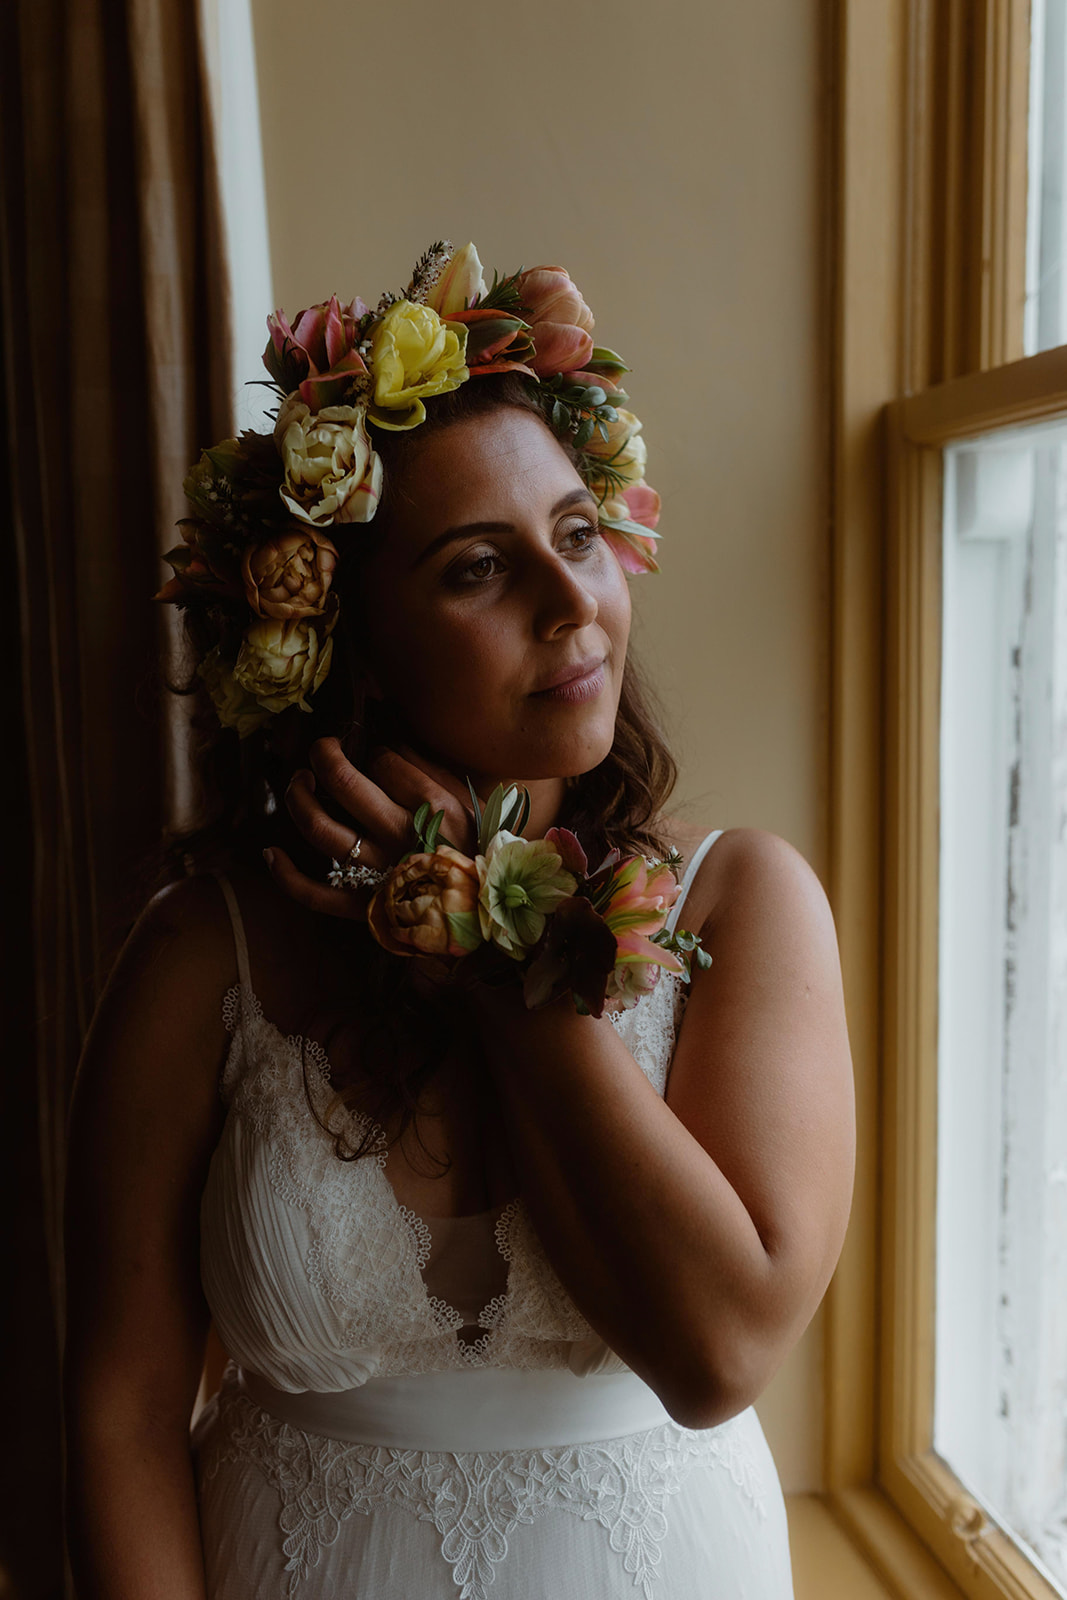 Rebecca and her beautiful flower crown and dress for her Isle of Skye elopement